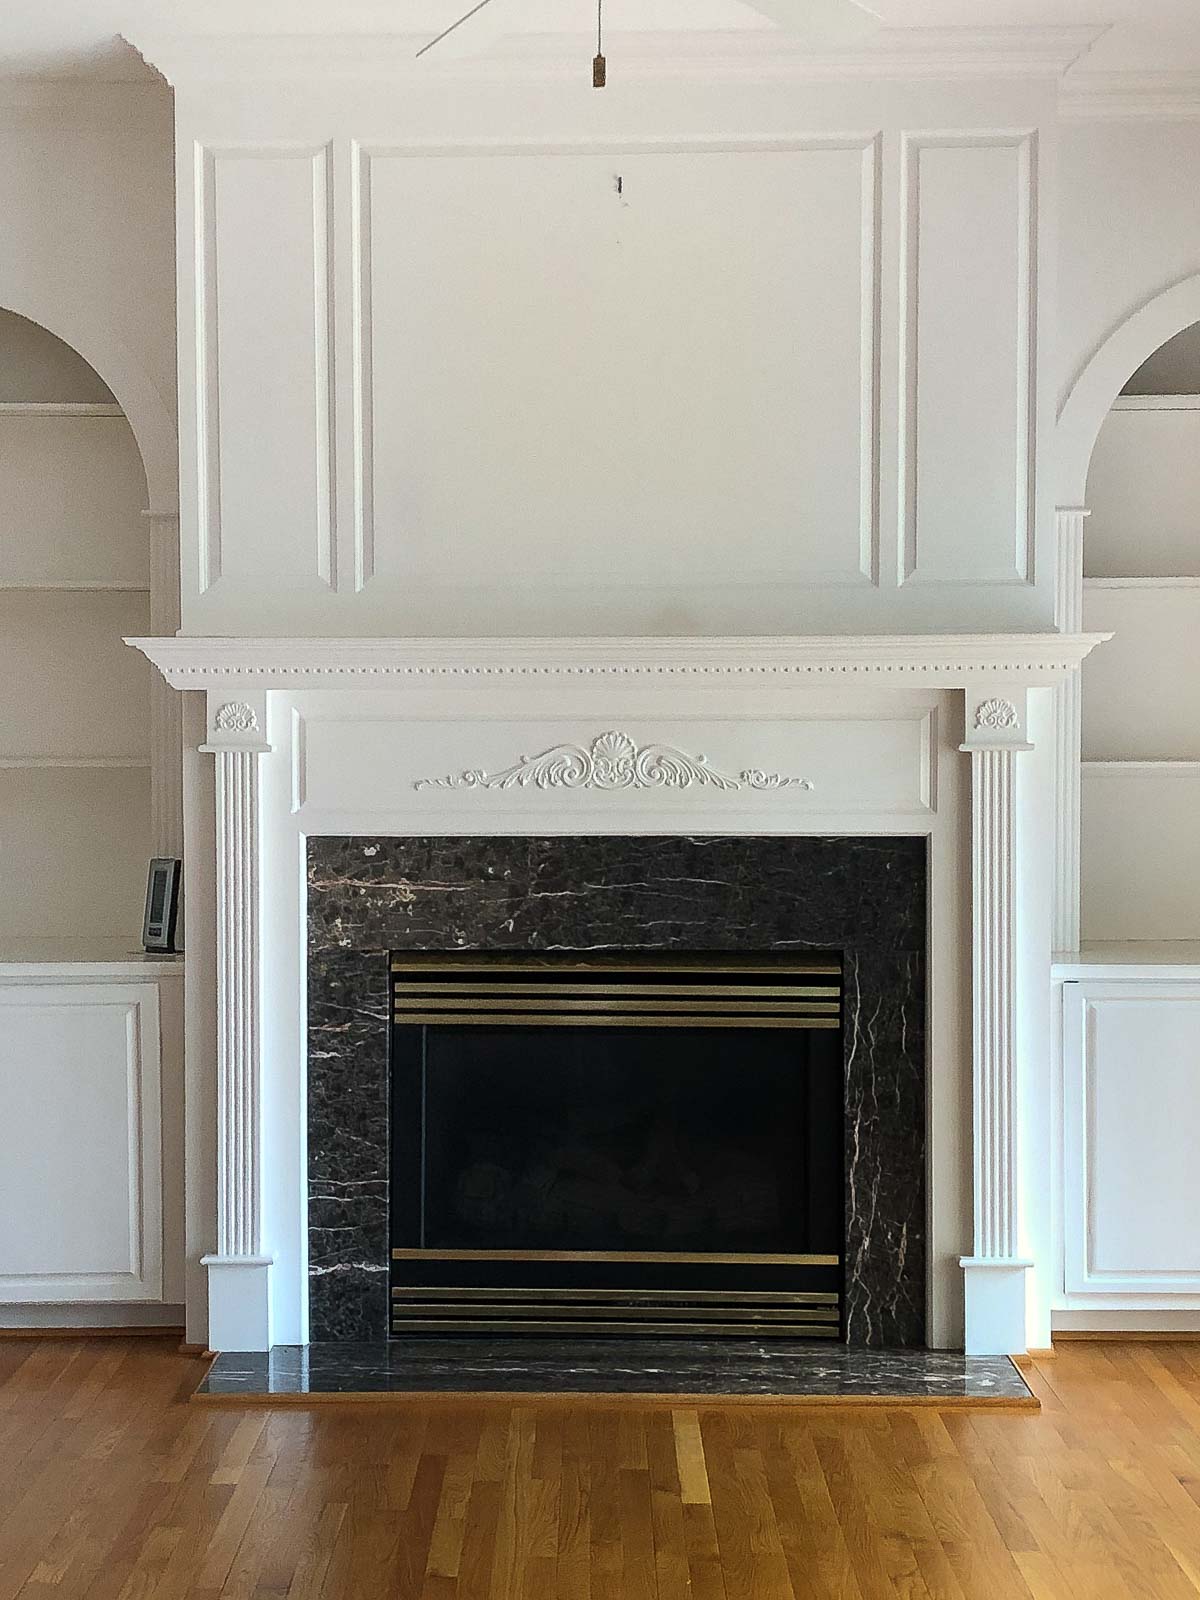 Our fireplace surround and mantel before renovating